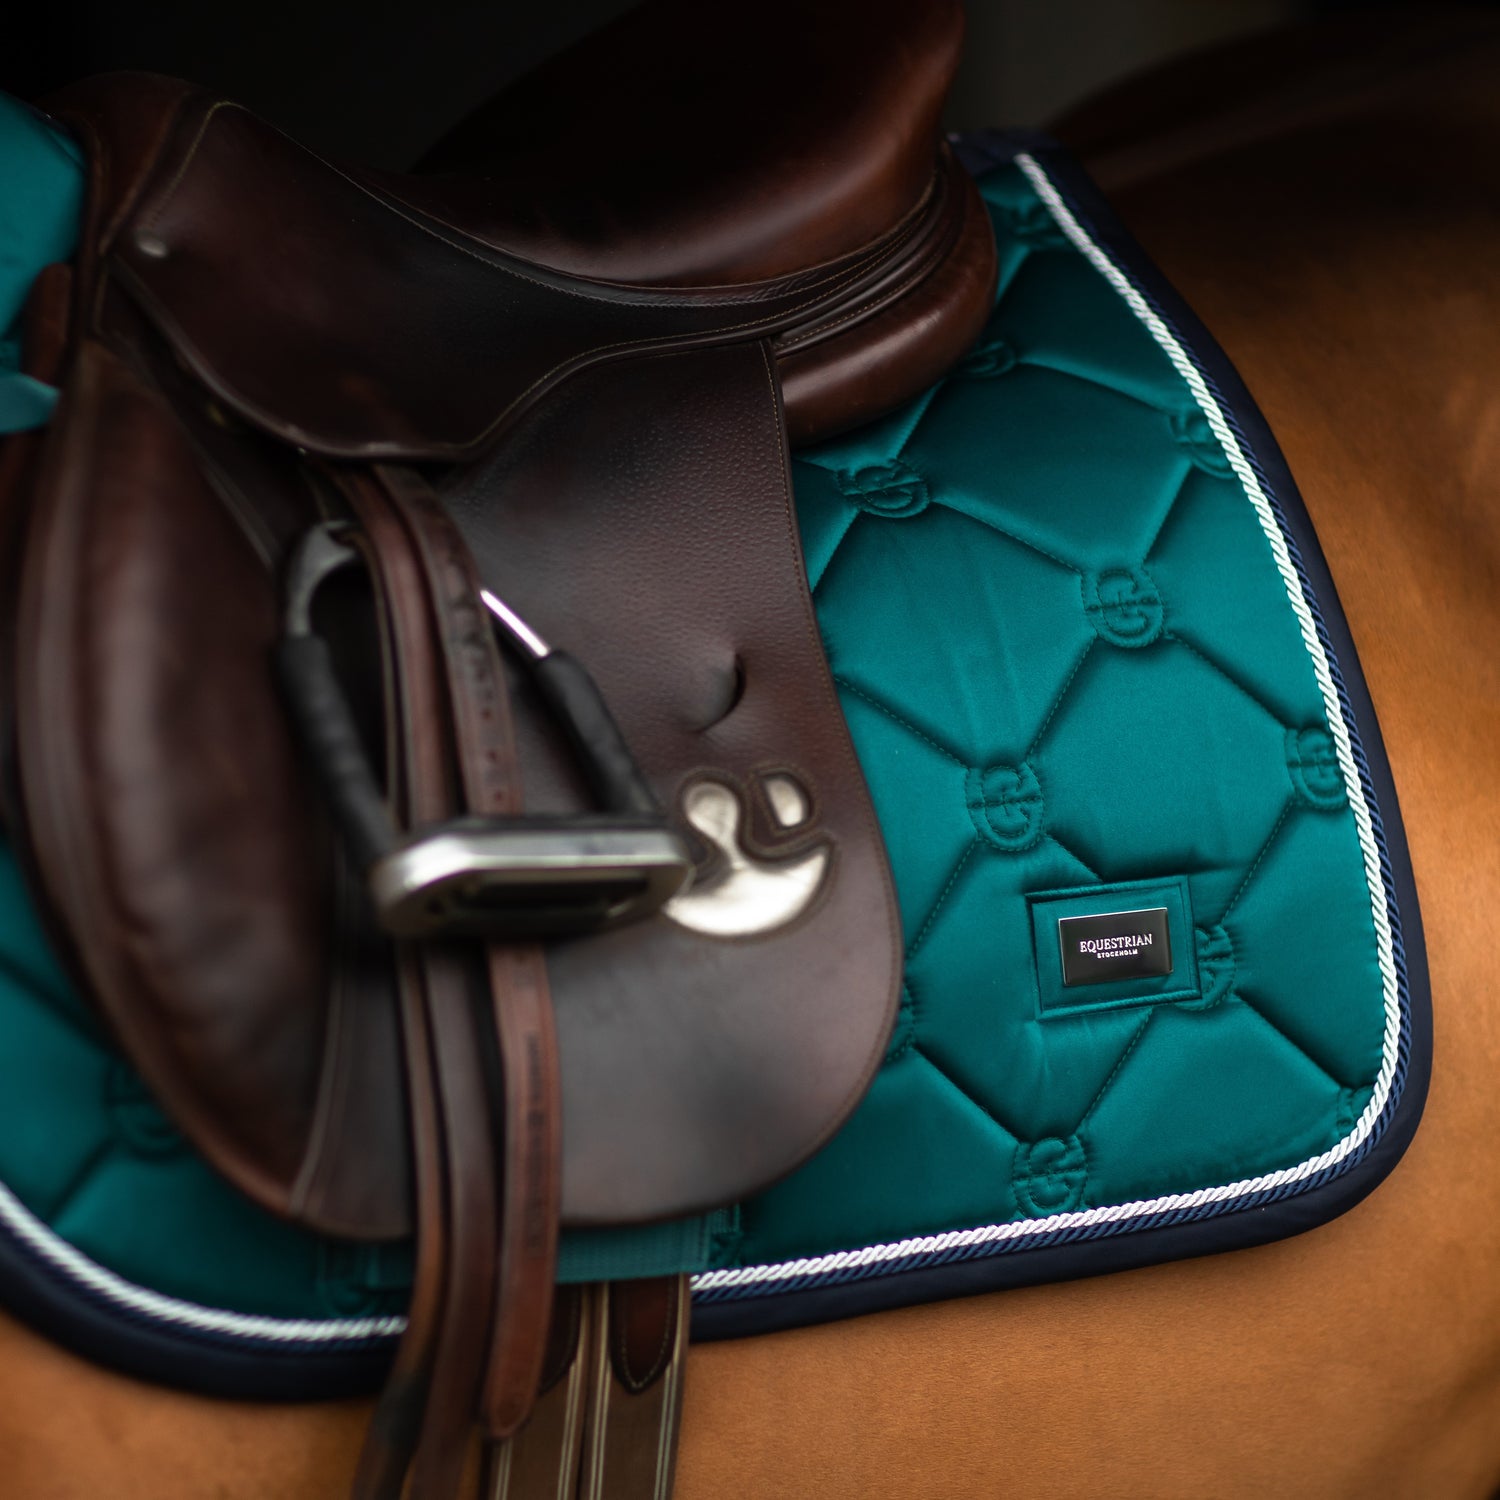 Which Saddle Pad is the Best?